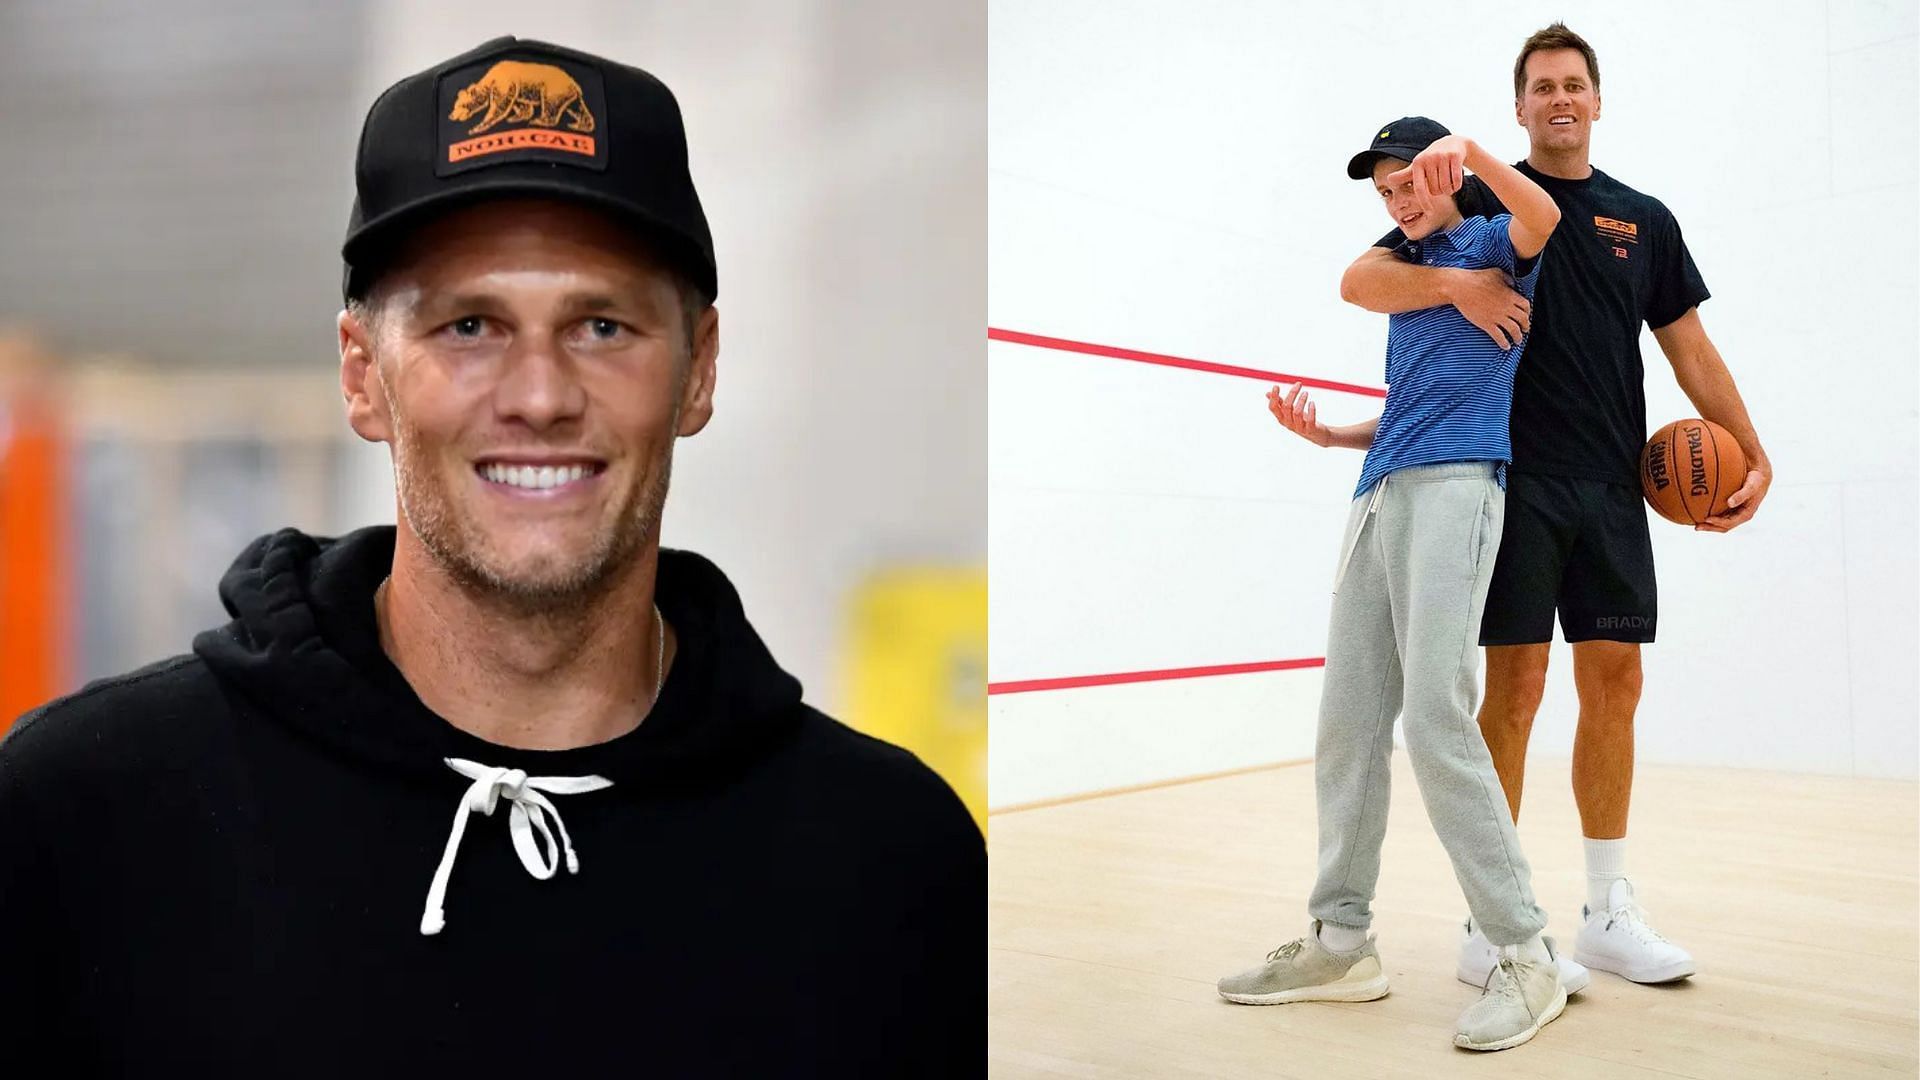 Tom Brady (L) took to Instagram to share photo with his oldest son Jack (R)